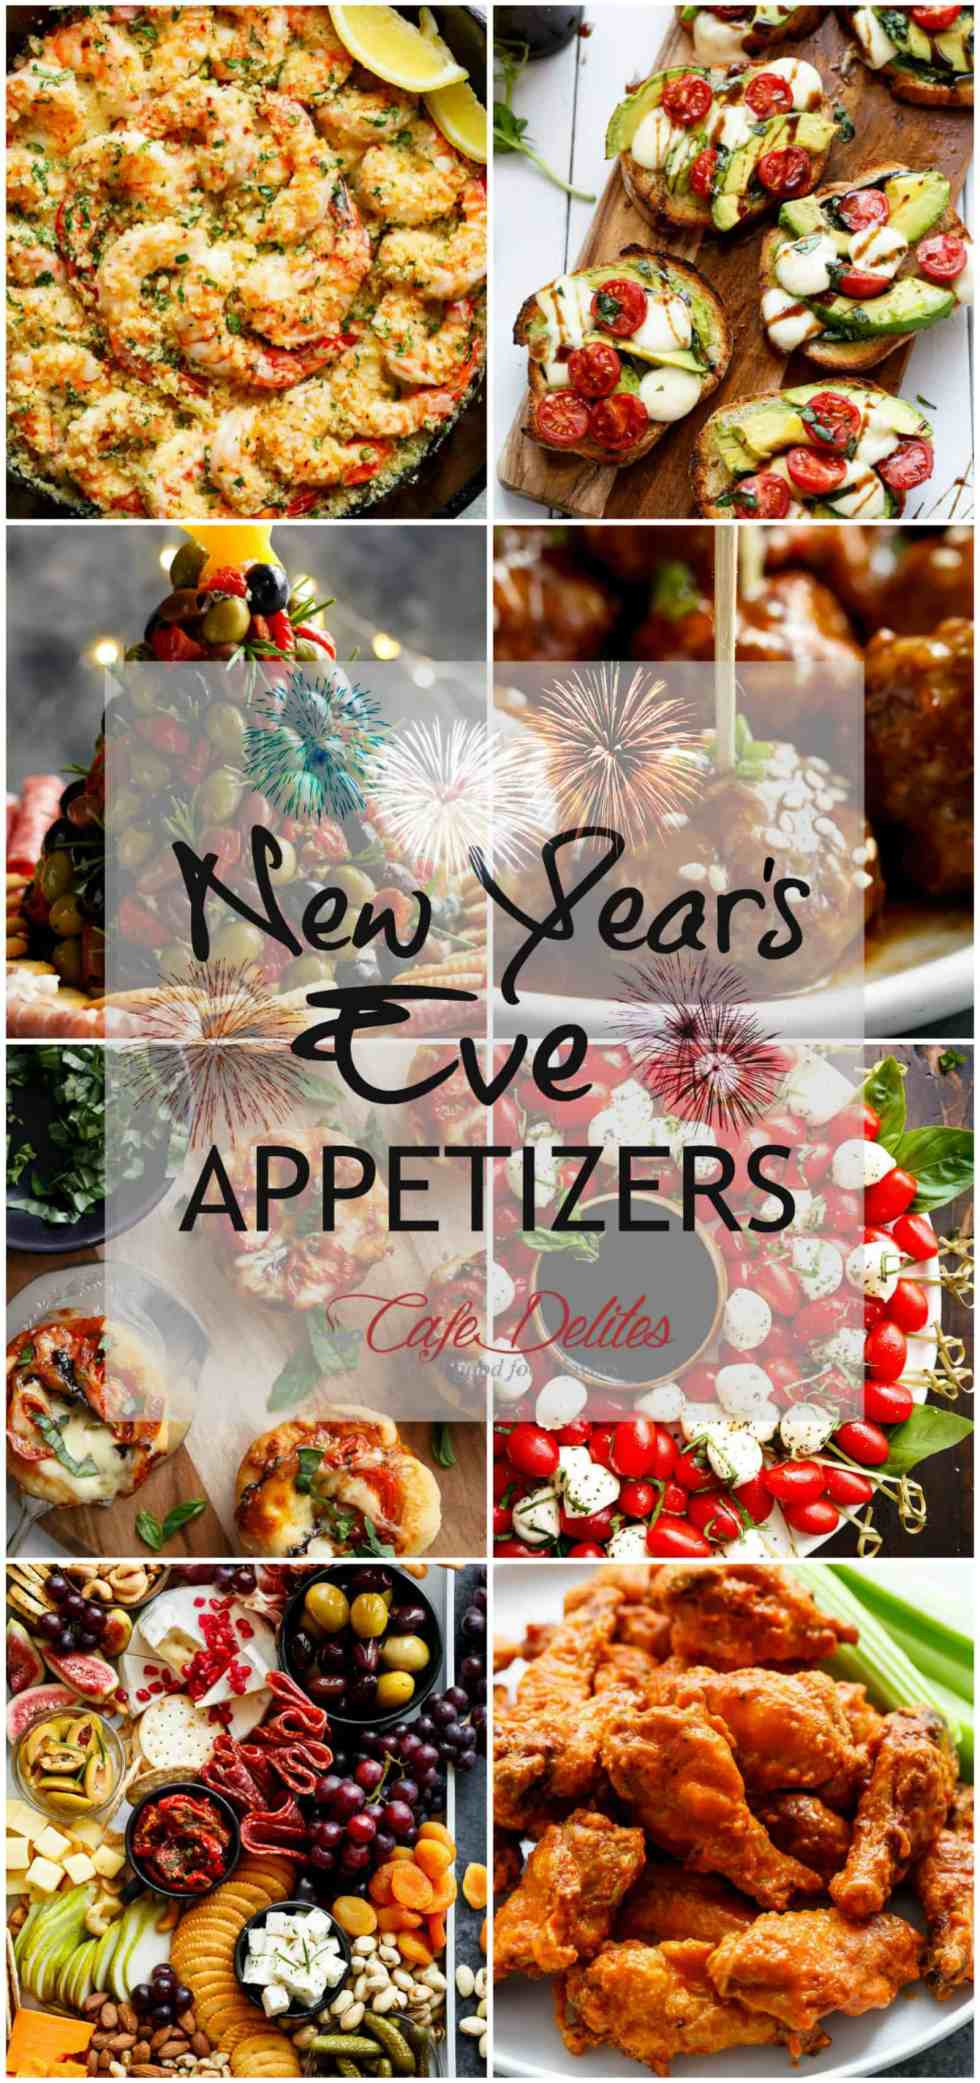 Best Appetizers For New Years Eve Parties
 The Best New Year s Eve Appetizers Cafe Delites